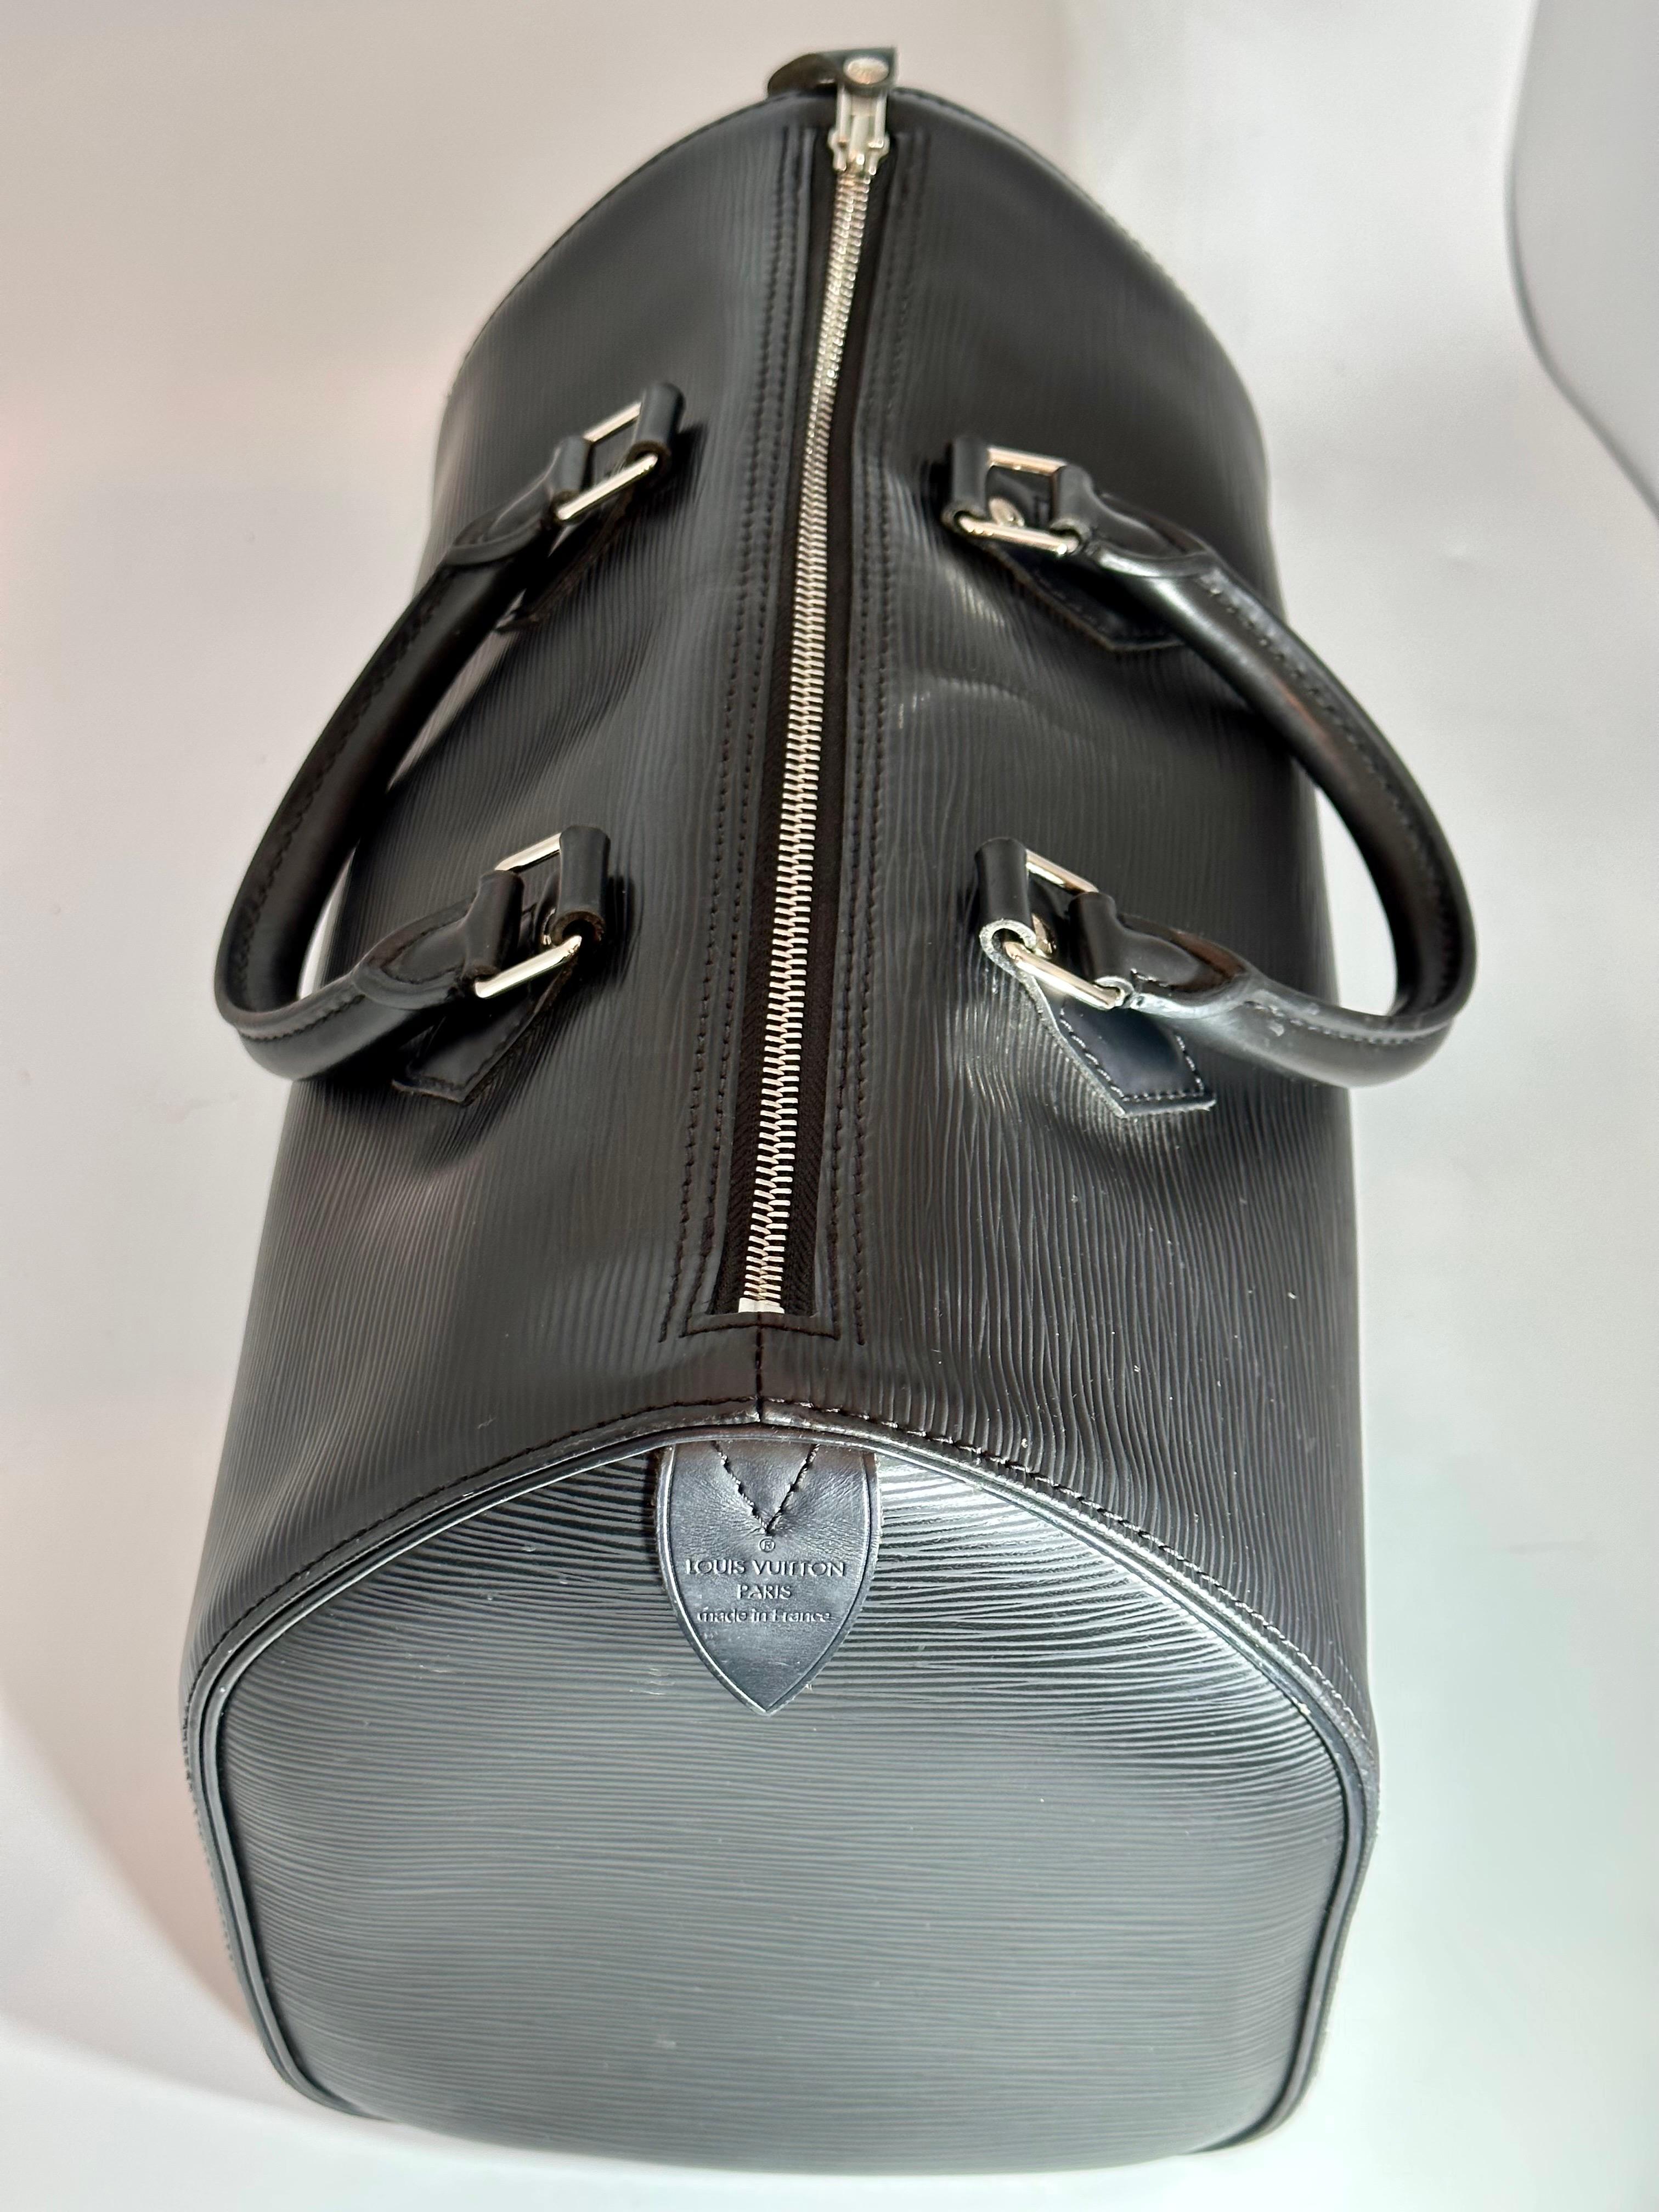 
Excellent condition like new
comes with a dust bag 
Code # SP 4130
Cited as one of the maison's first-ever releases for everyday use, the Speedy silhouette is a fail-safe companion for your daily to-dos. It’s been updated in black Epi leather for